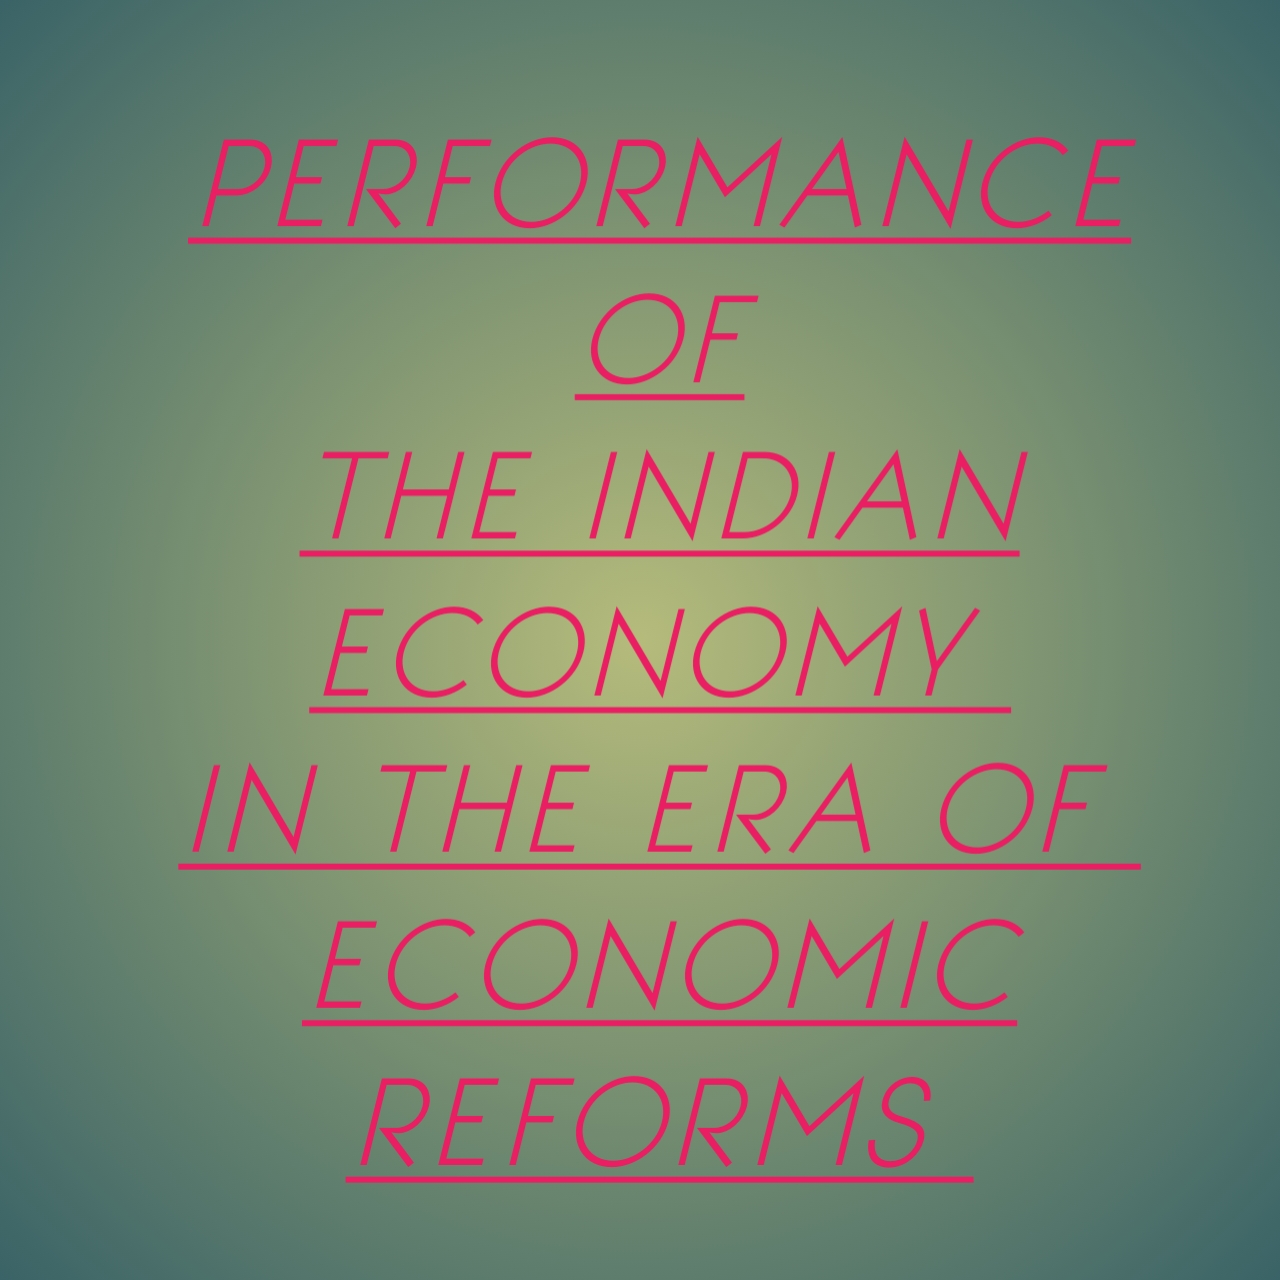 Performance of the Indian Economy in the Era of Economic Reforms